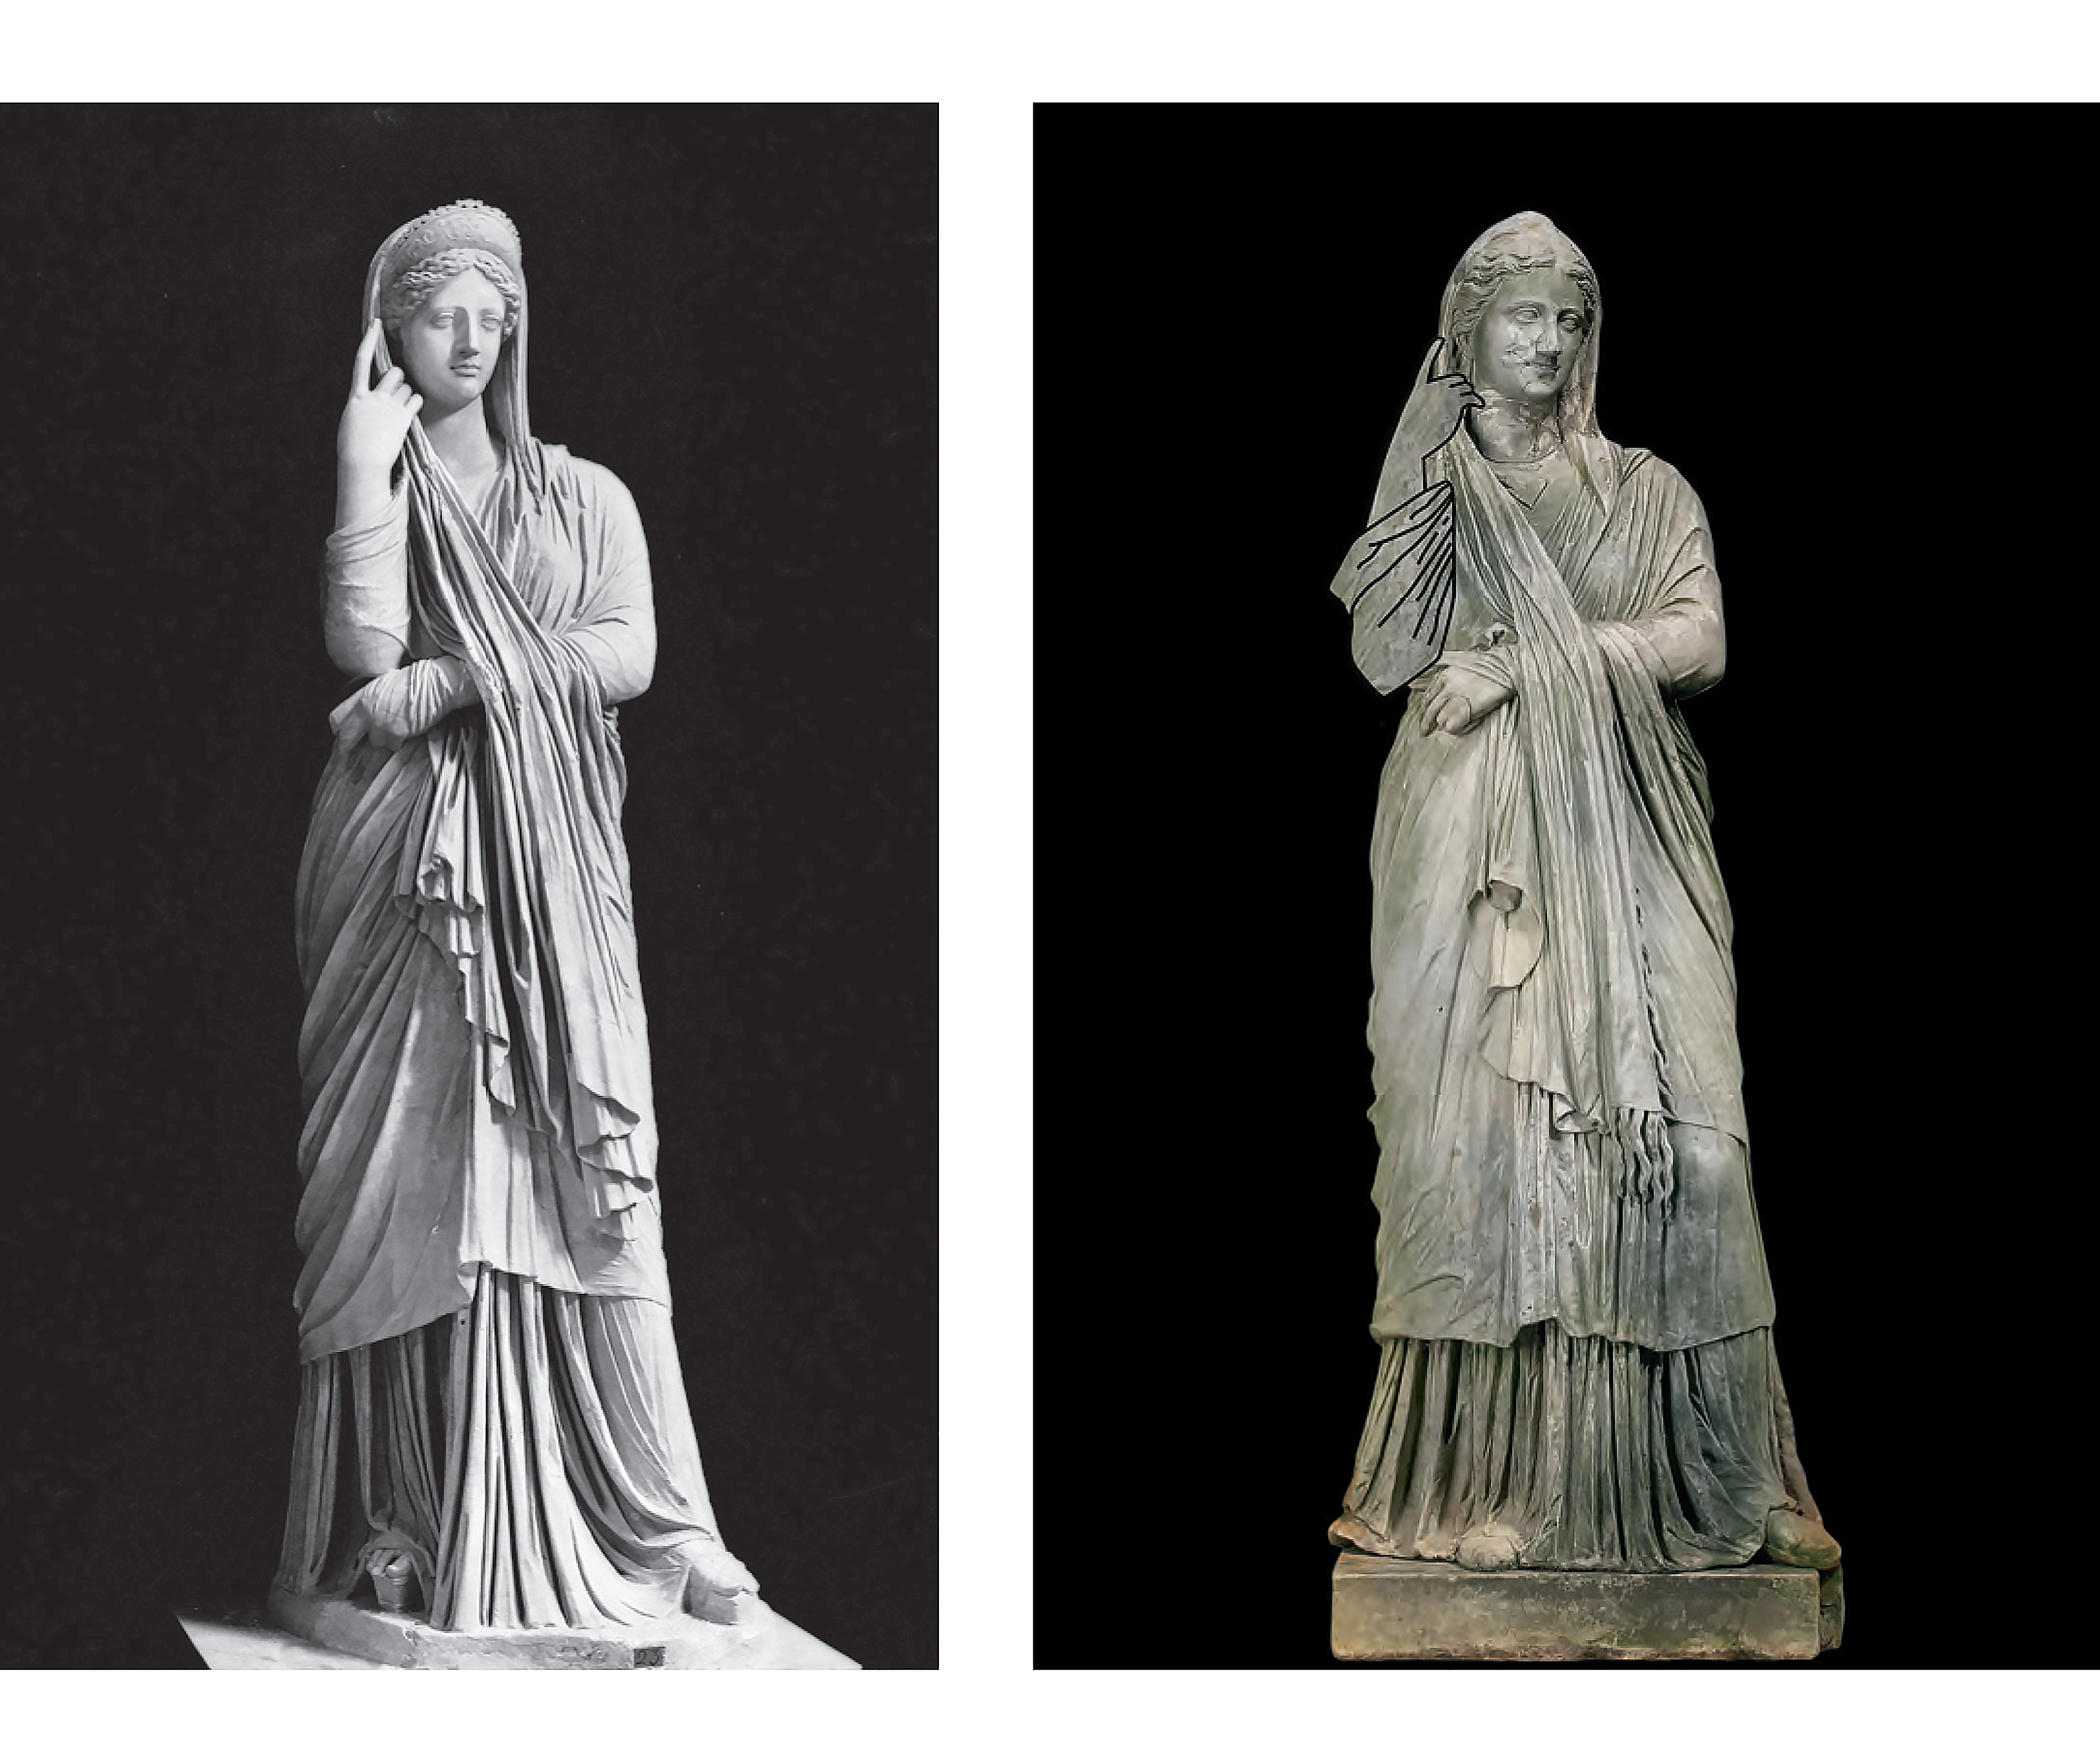 Fig_2_above_left_Statue_of_a_Woman_BraccioNuovoType_right_hand_and_head_restored_Roman_late1st_centuryAD_Marble_VaticanMuseums_Fig_3_above_right_Photoshop_Reconstruction_of_ﬁg1